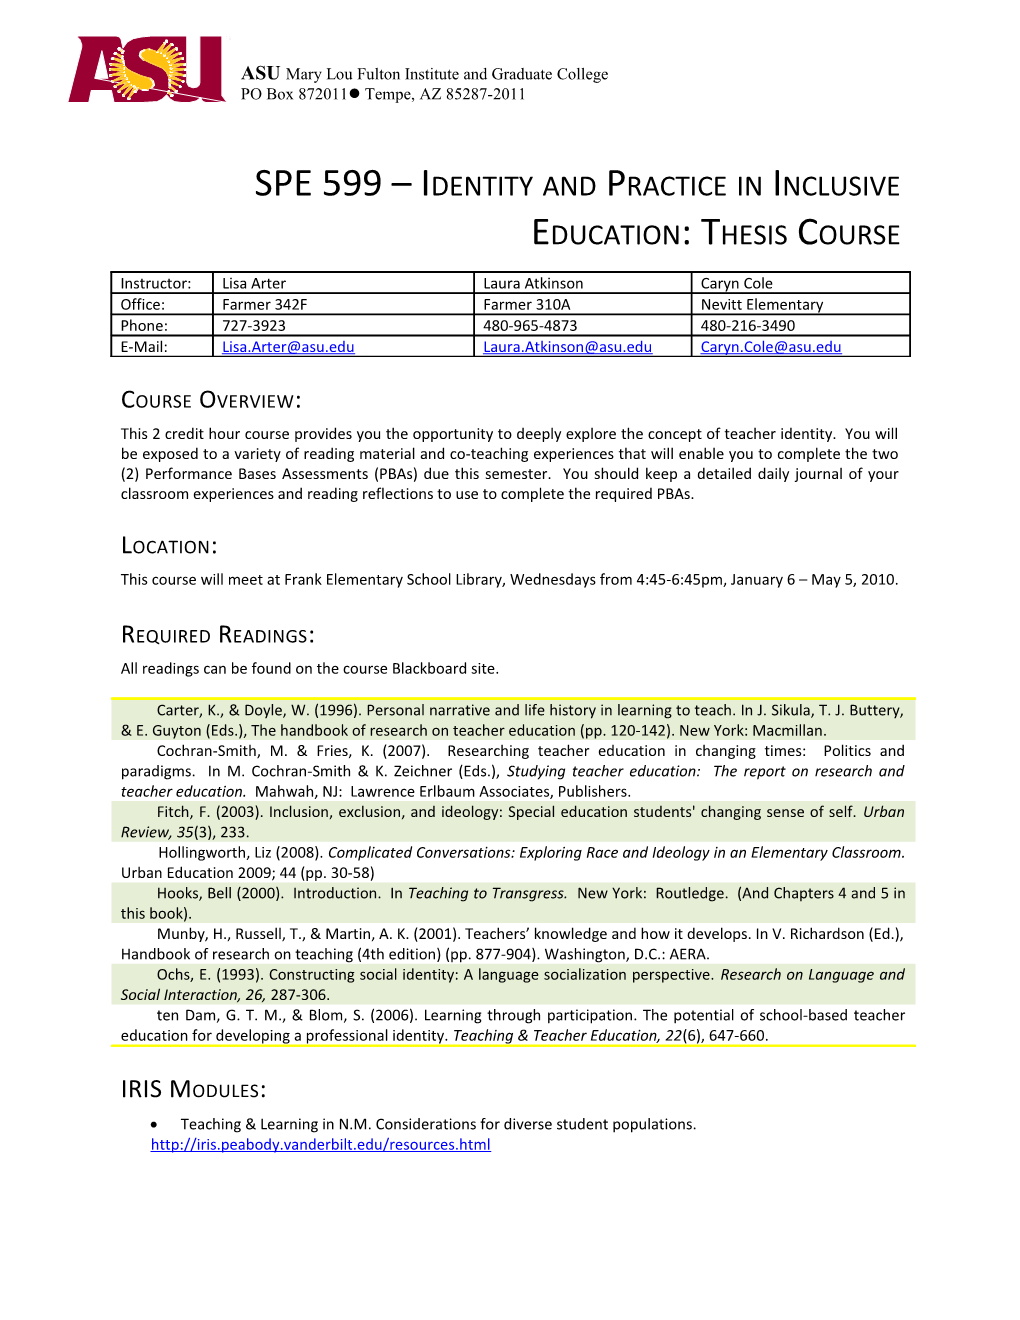 SPE 599 Identity and Practice in Inclusive Education: Thesis Course